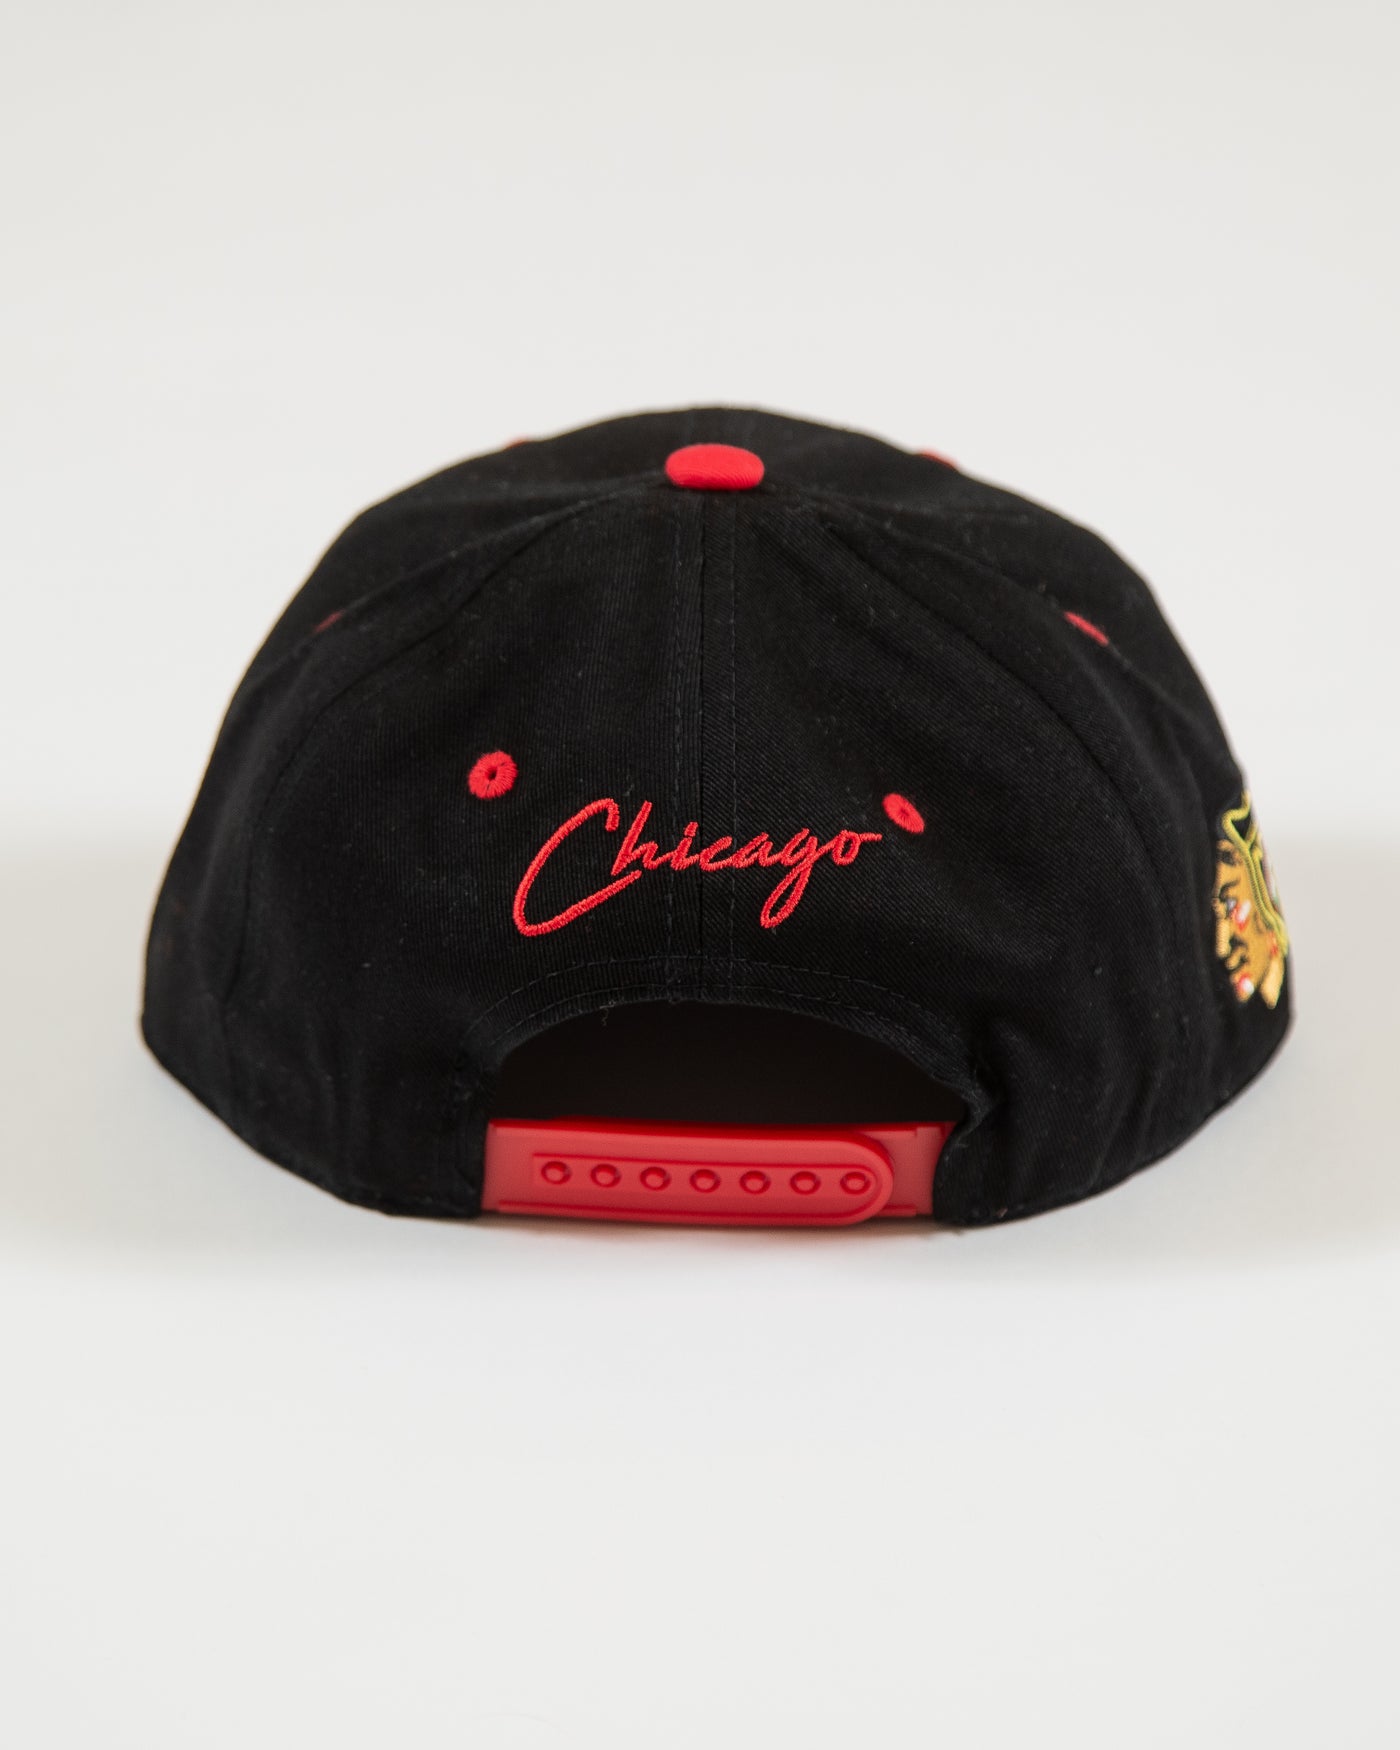 Outerstuff black and red youth snapback with flat brim with Chicago Blackhawks wordmark and primary logo with graffiti inspired design - back angle lay flat